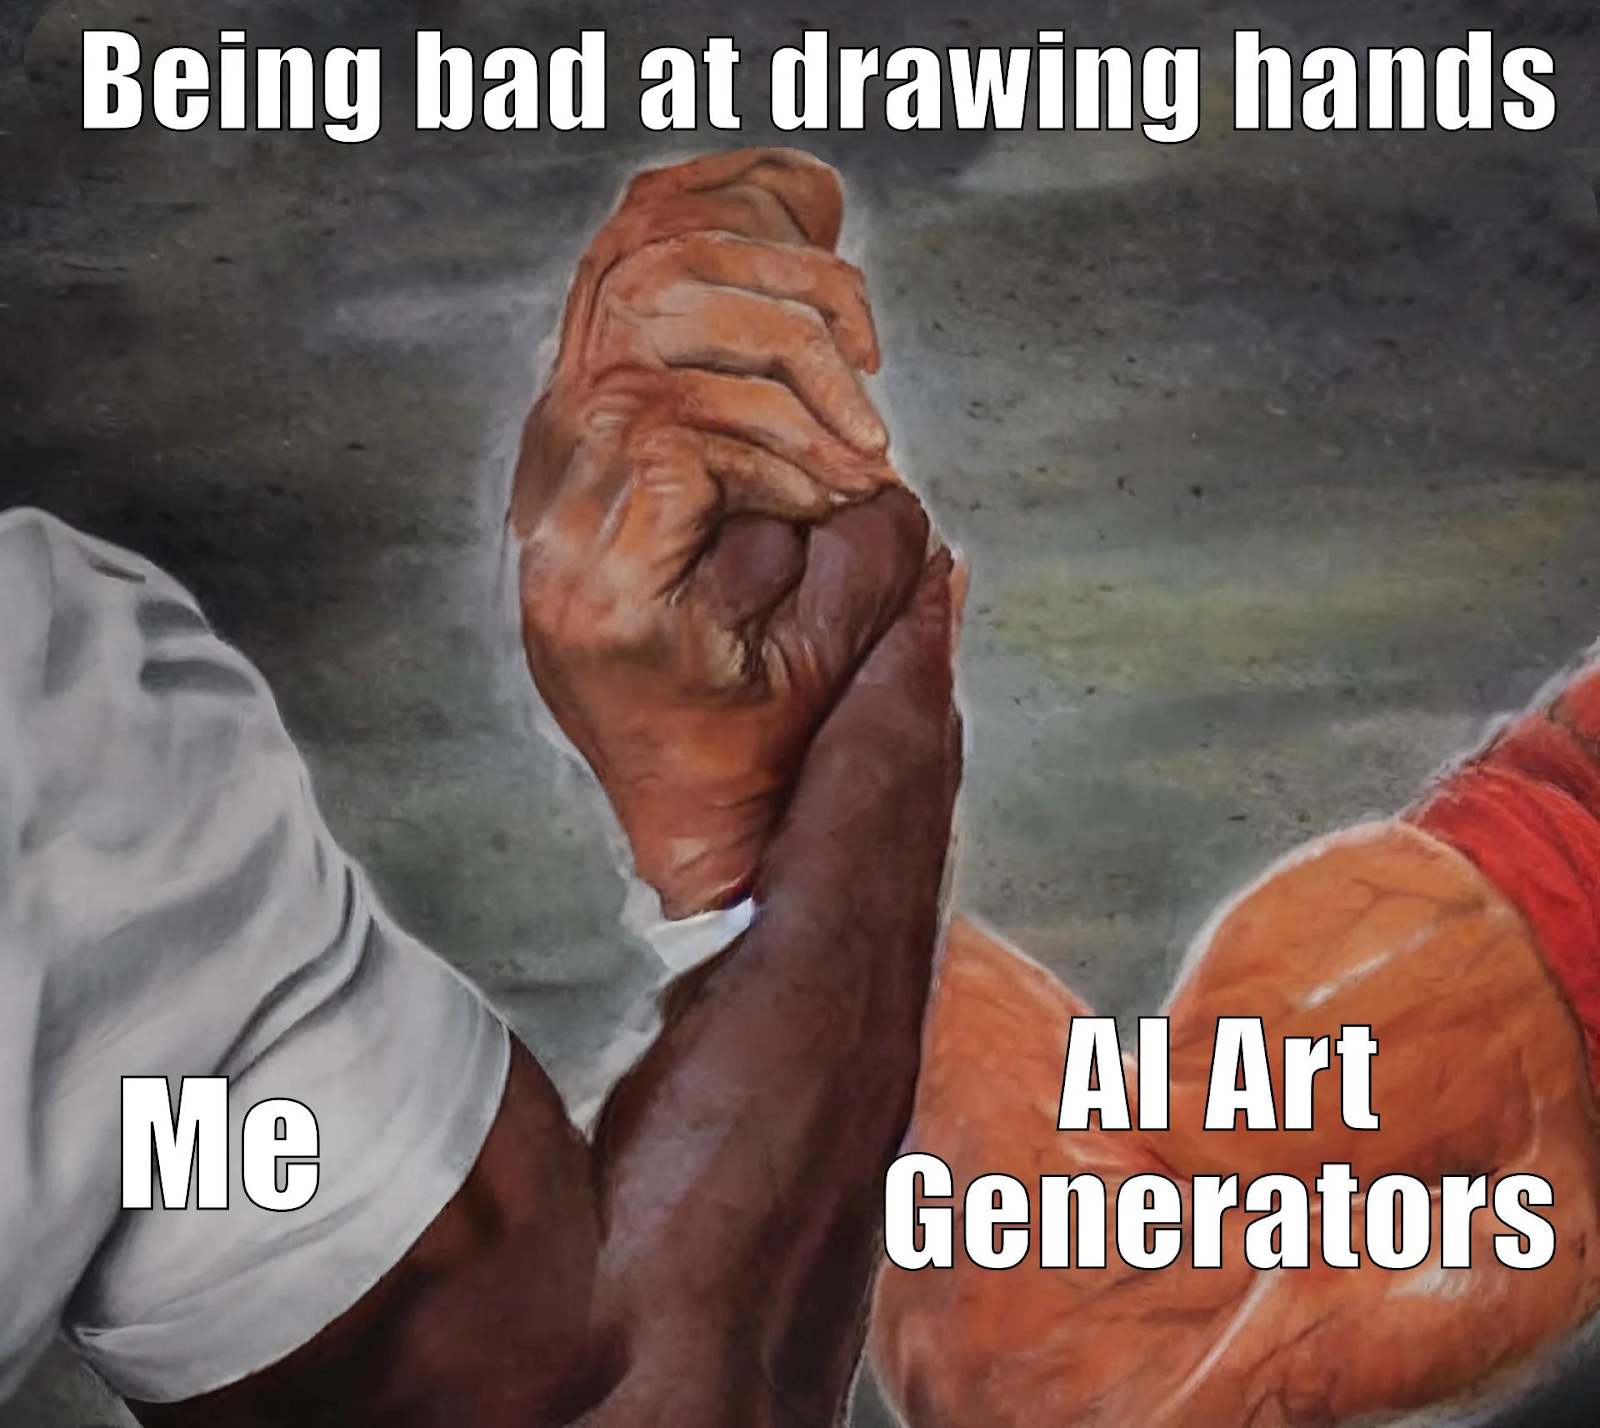 Epic handshake meme. On the left is "me". On the right is "AI Art Generators". In the middle above the handshake is "Being bad at drawing hands". The hands have far too many fingers.